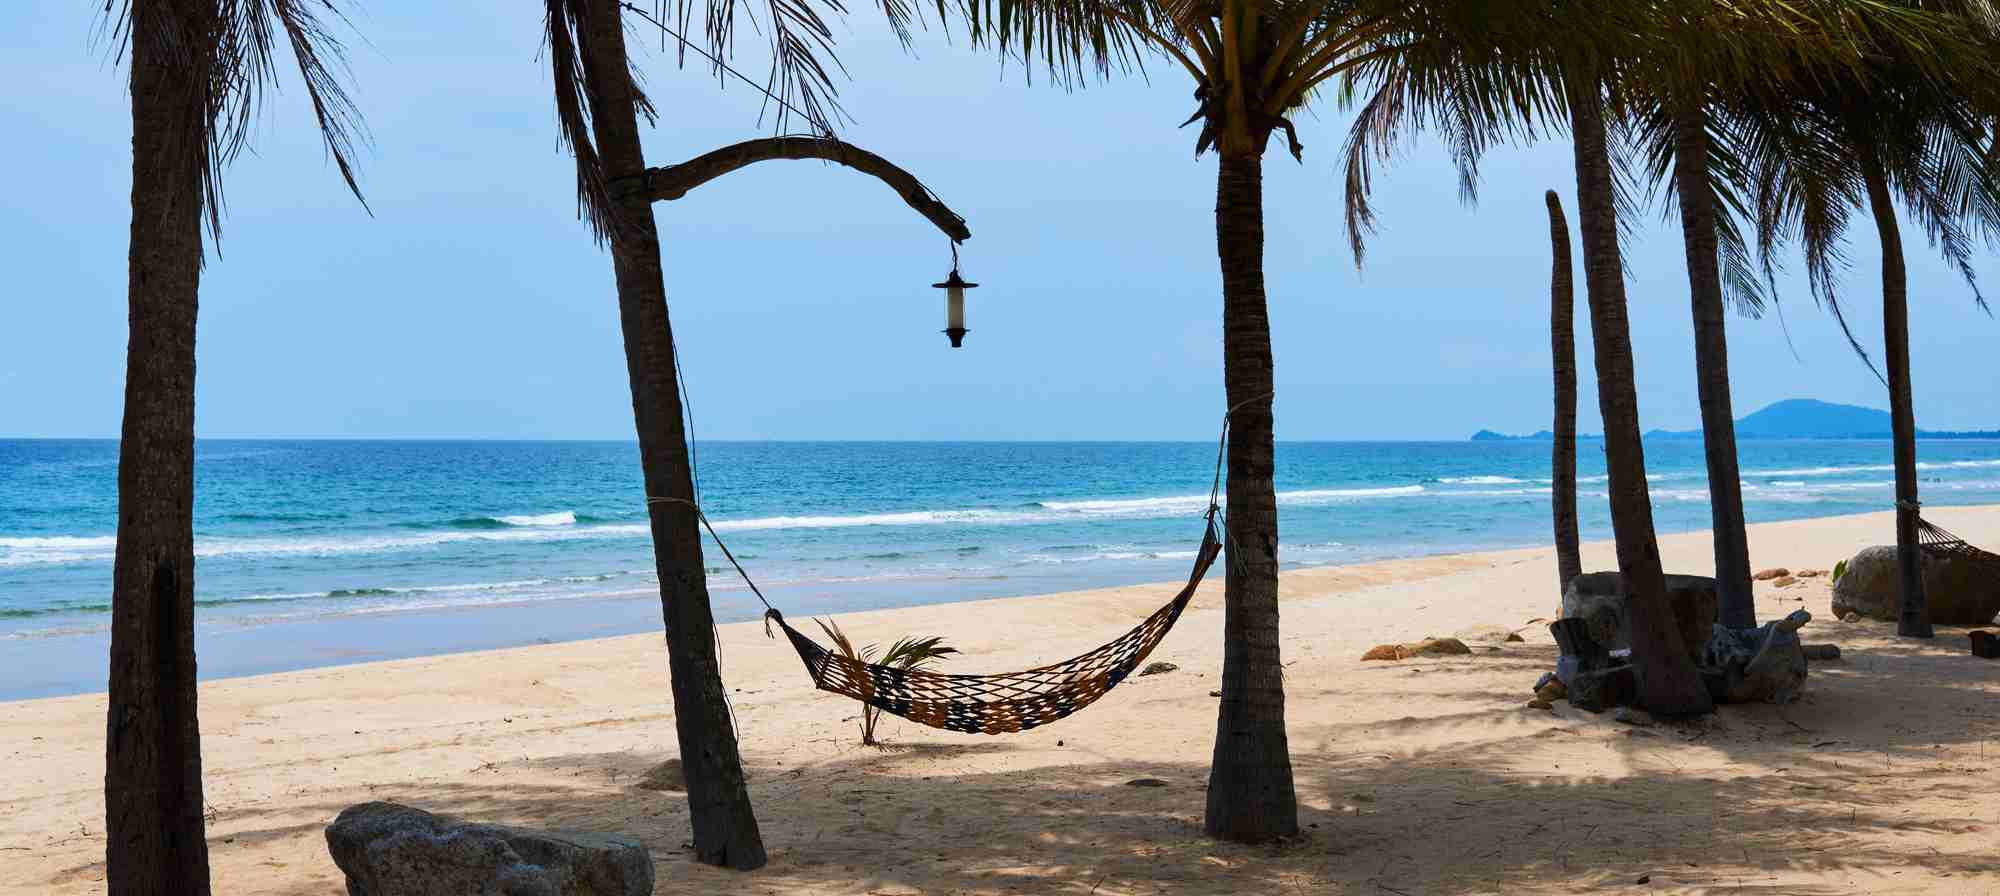 How to Set Up a Hammock on the Beach - Effortless Outdoors